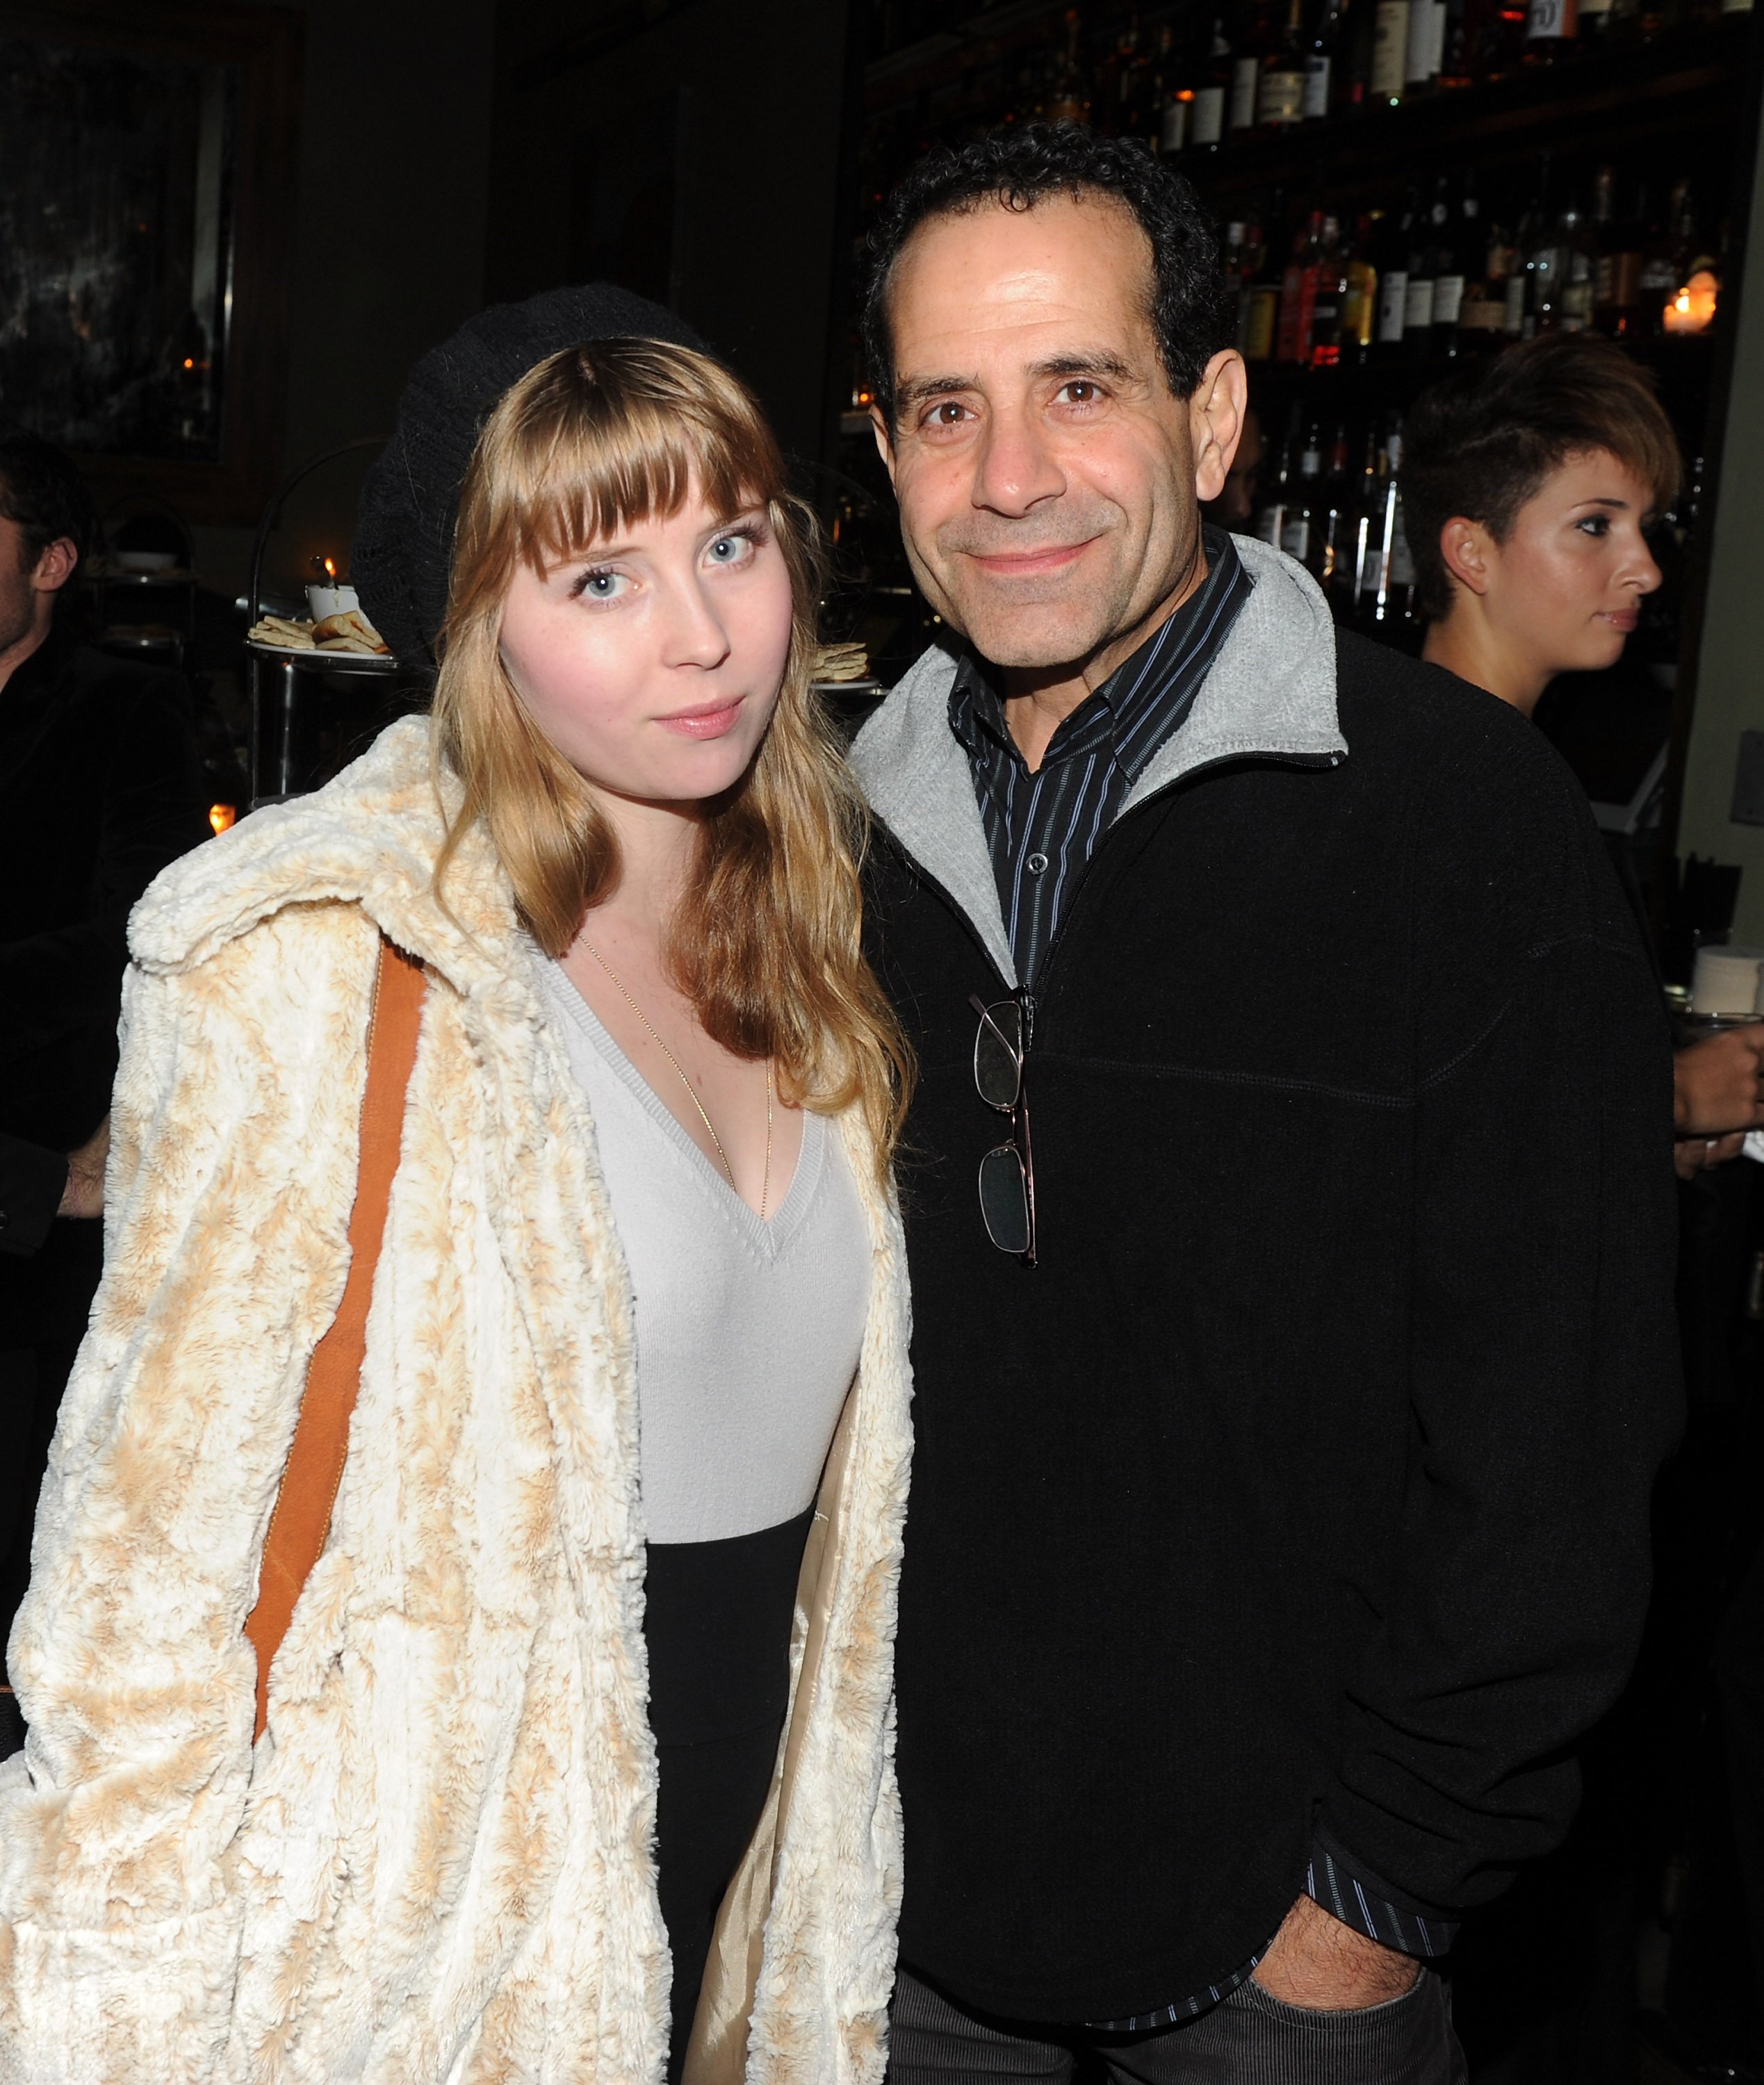 Josie Lynn Adams and father actor Tony Shalhoub attend the after party for the Cinema Society & Sony Pictures Classics screening of "Made In Dagenham" at the Soho Grand Hotel on November 14, 2010 in New York City. Photo: Getty Images